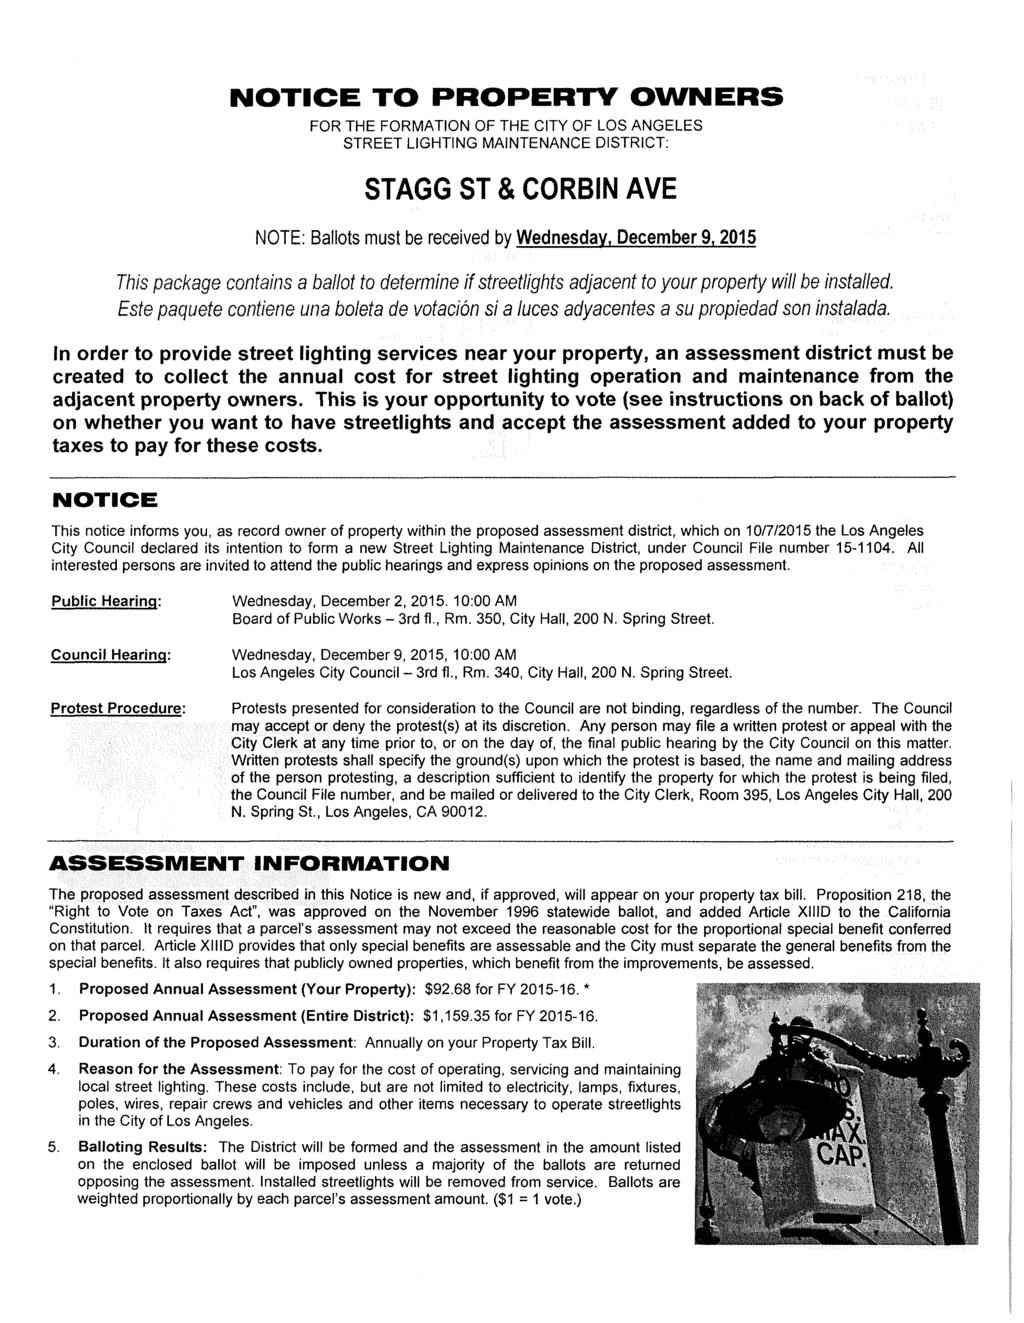 NOTICE TO PROPERTY OWNERS FOR THE FORMATION OF THE CITY OF LOS ANGELES STREET LIGHTING MAINTENANCE DISTRICT: STAGG ST & CORBIN AVE NOTE: Ballots must be received by Wednesday, December 9,2015 This